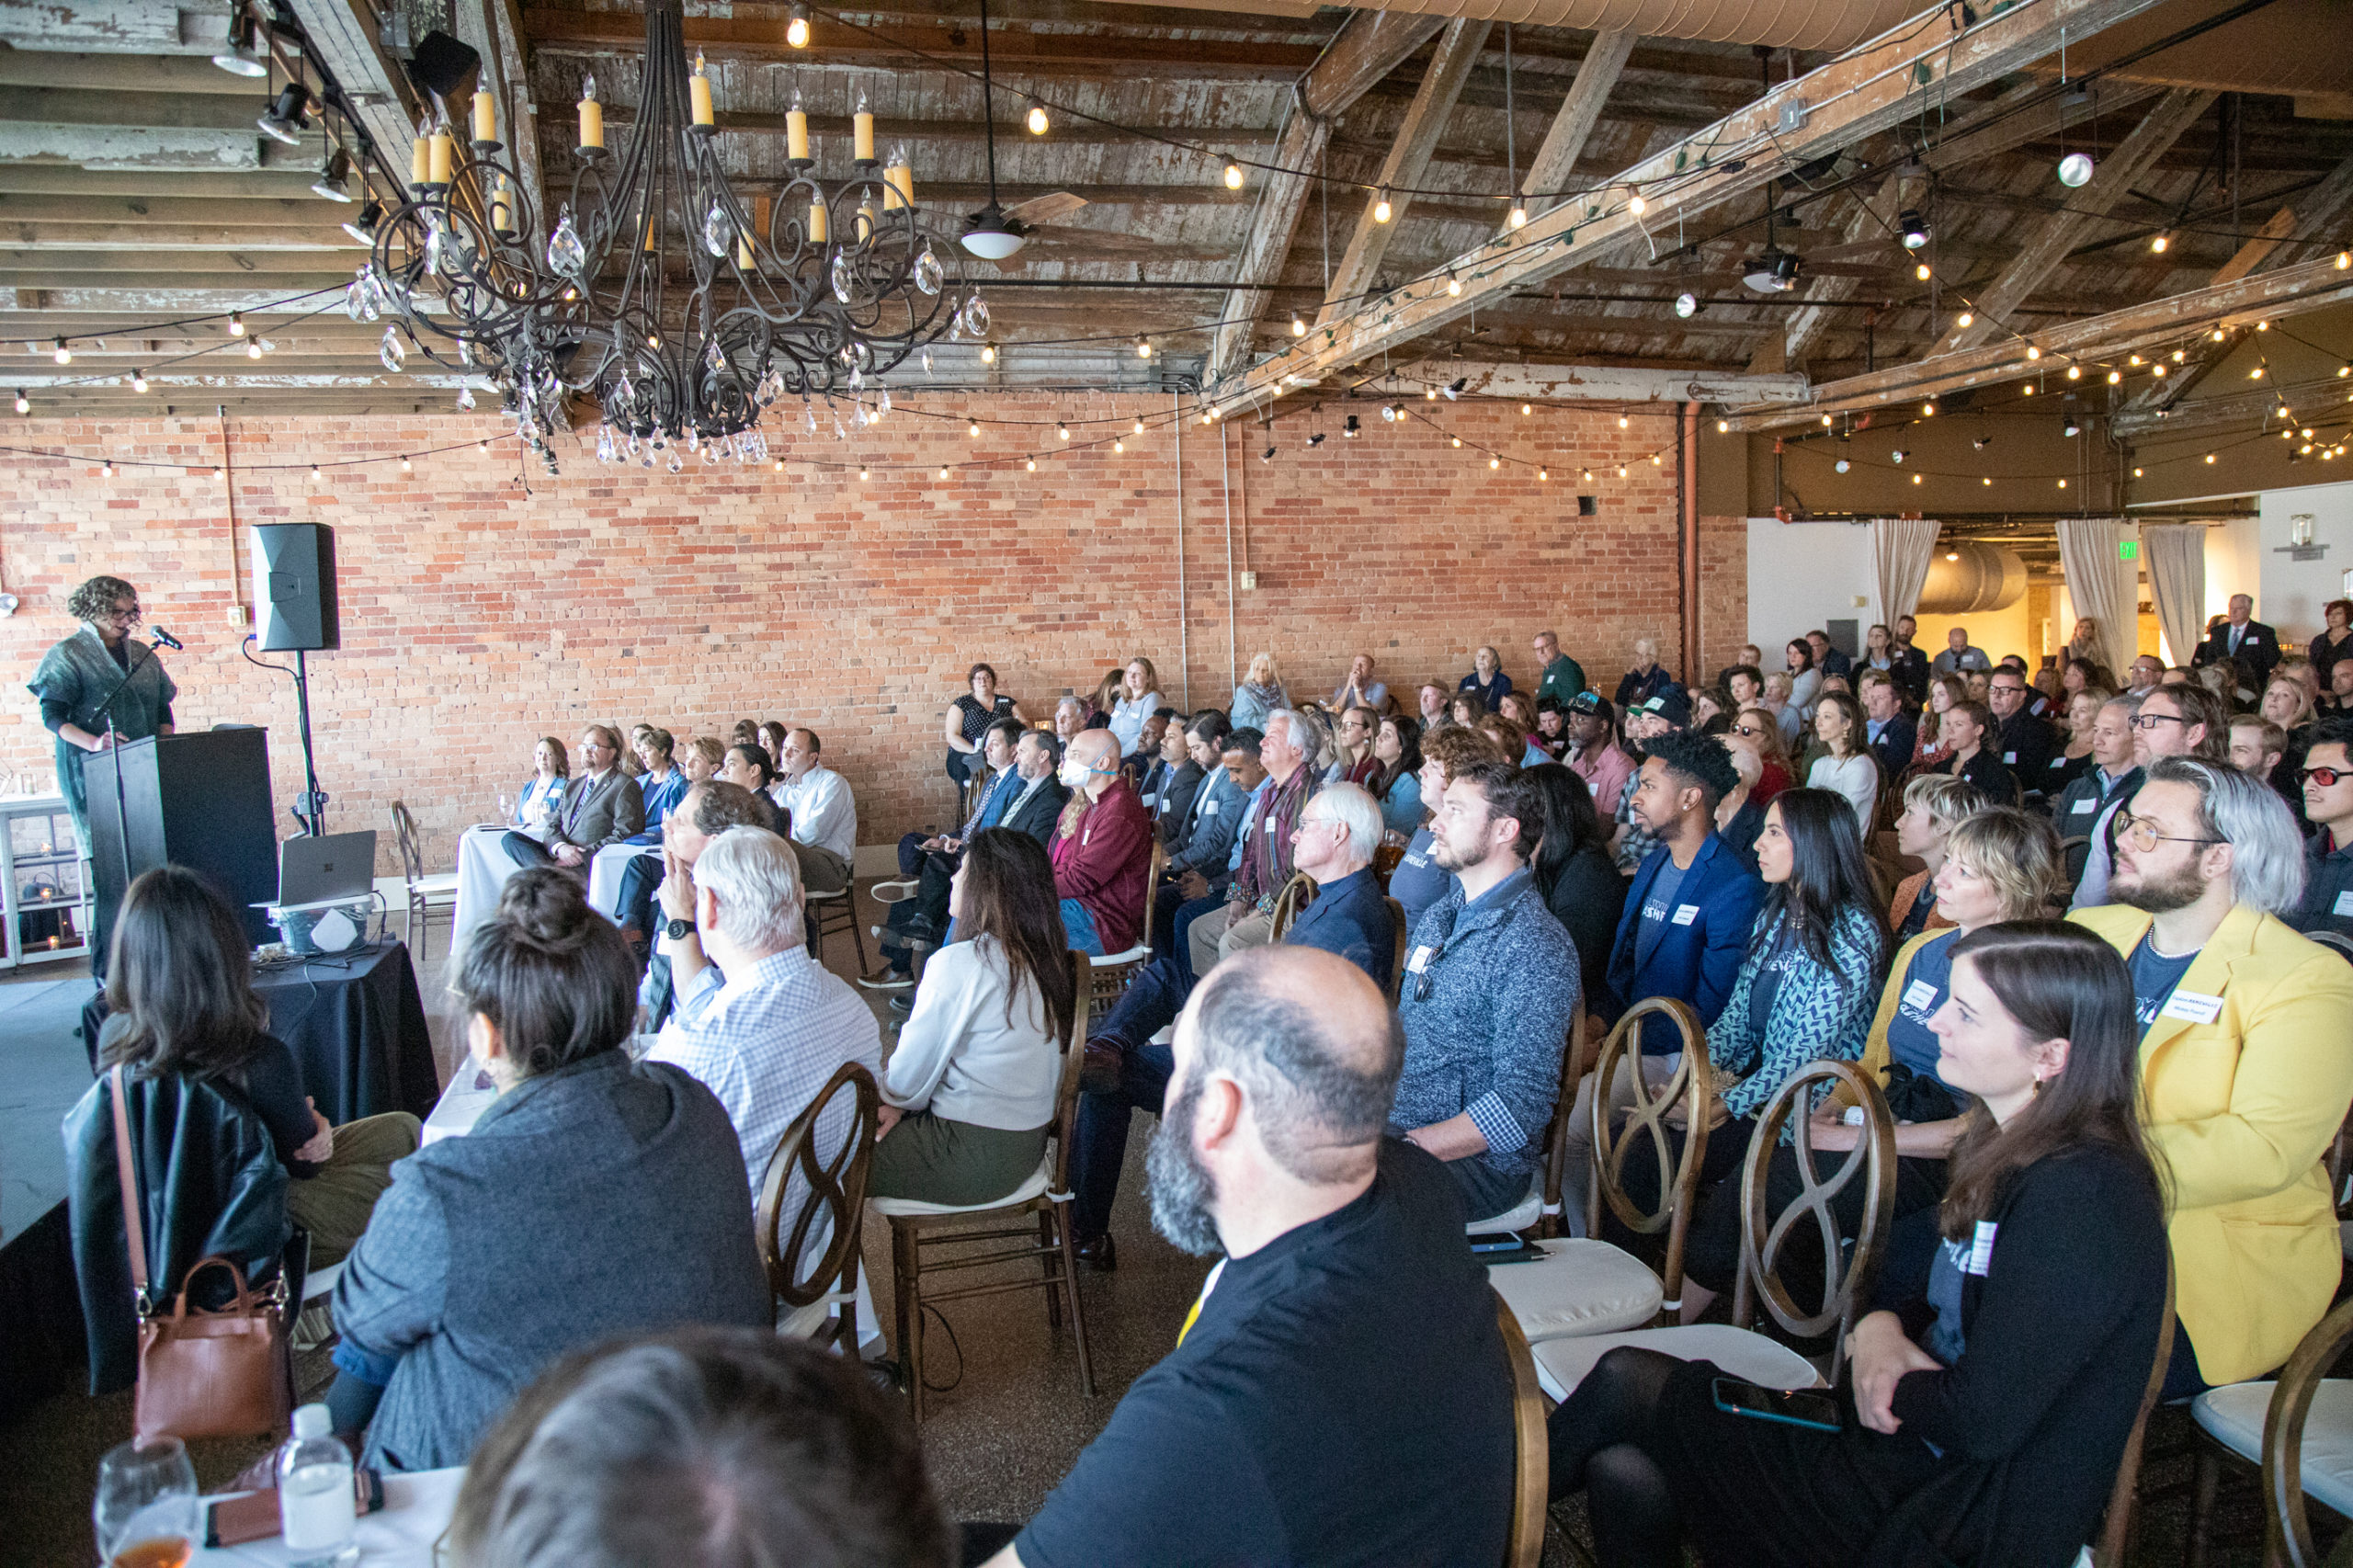 Asheville and Buncombe County leaders and visitor industry stakeholders gathered at The Venue Jan. 19 for Explore Asheville’s event: The Year Ahead.